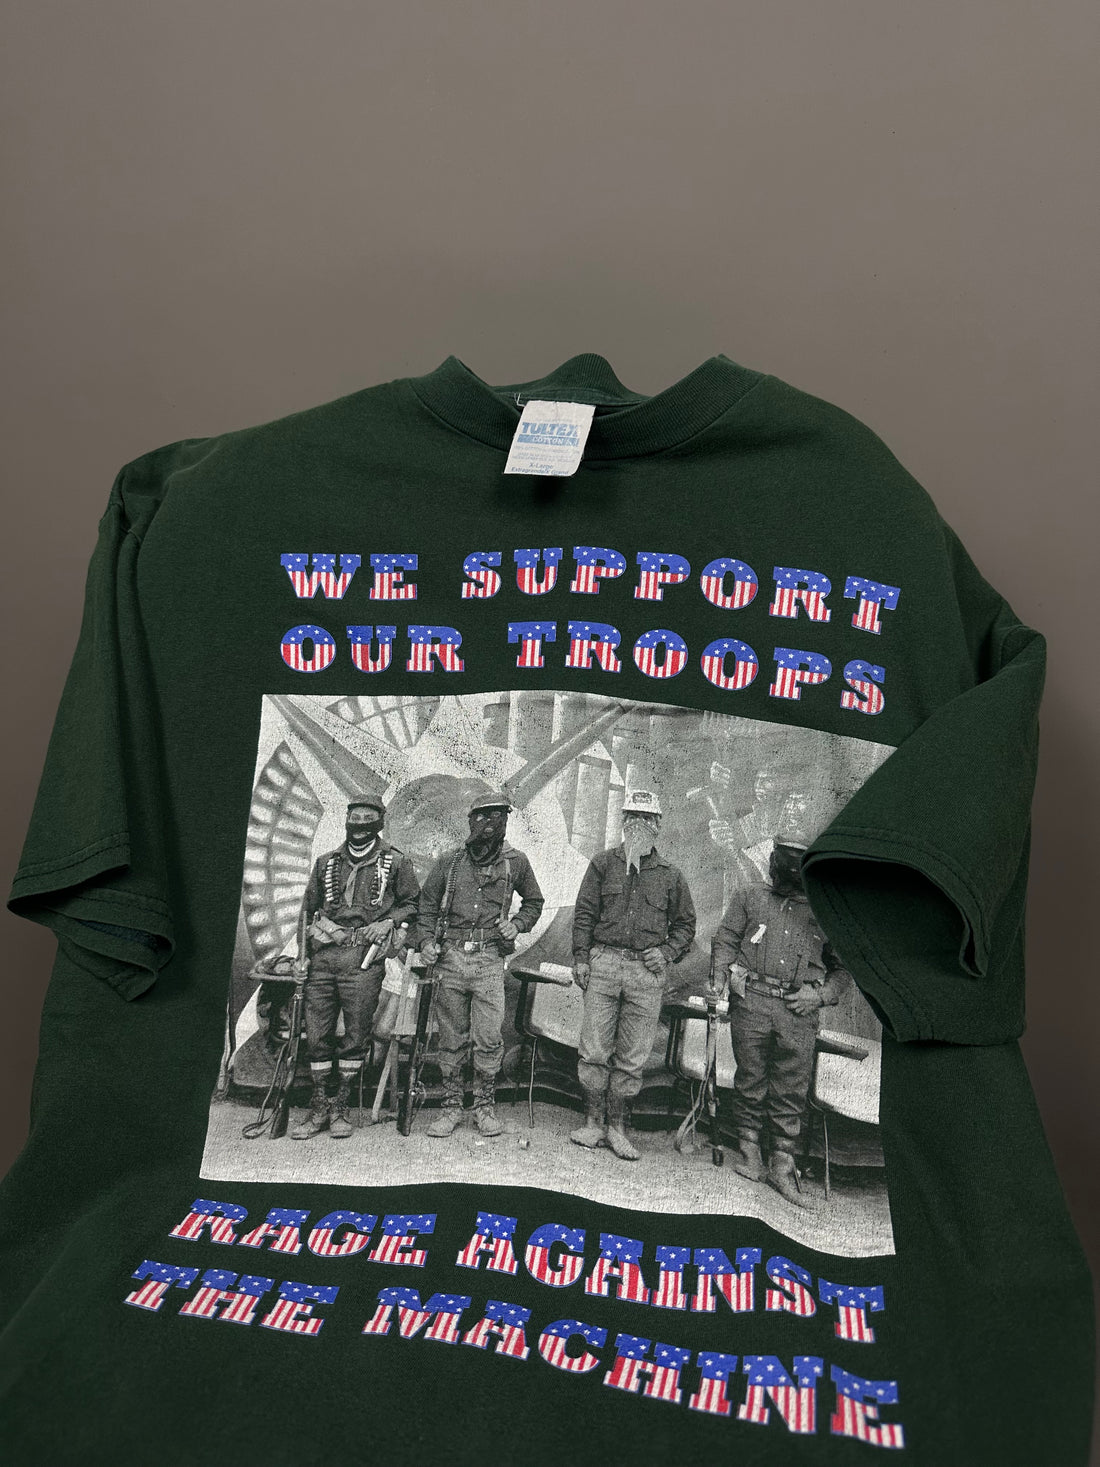 Rage Against The Machine 1990s Support Troops Vintage T-Shirt